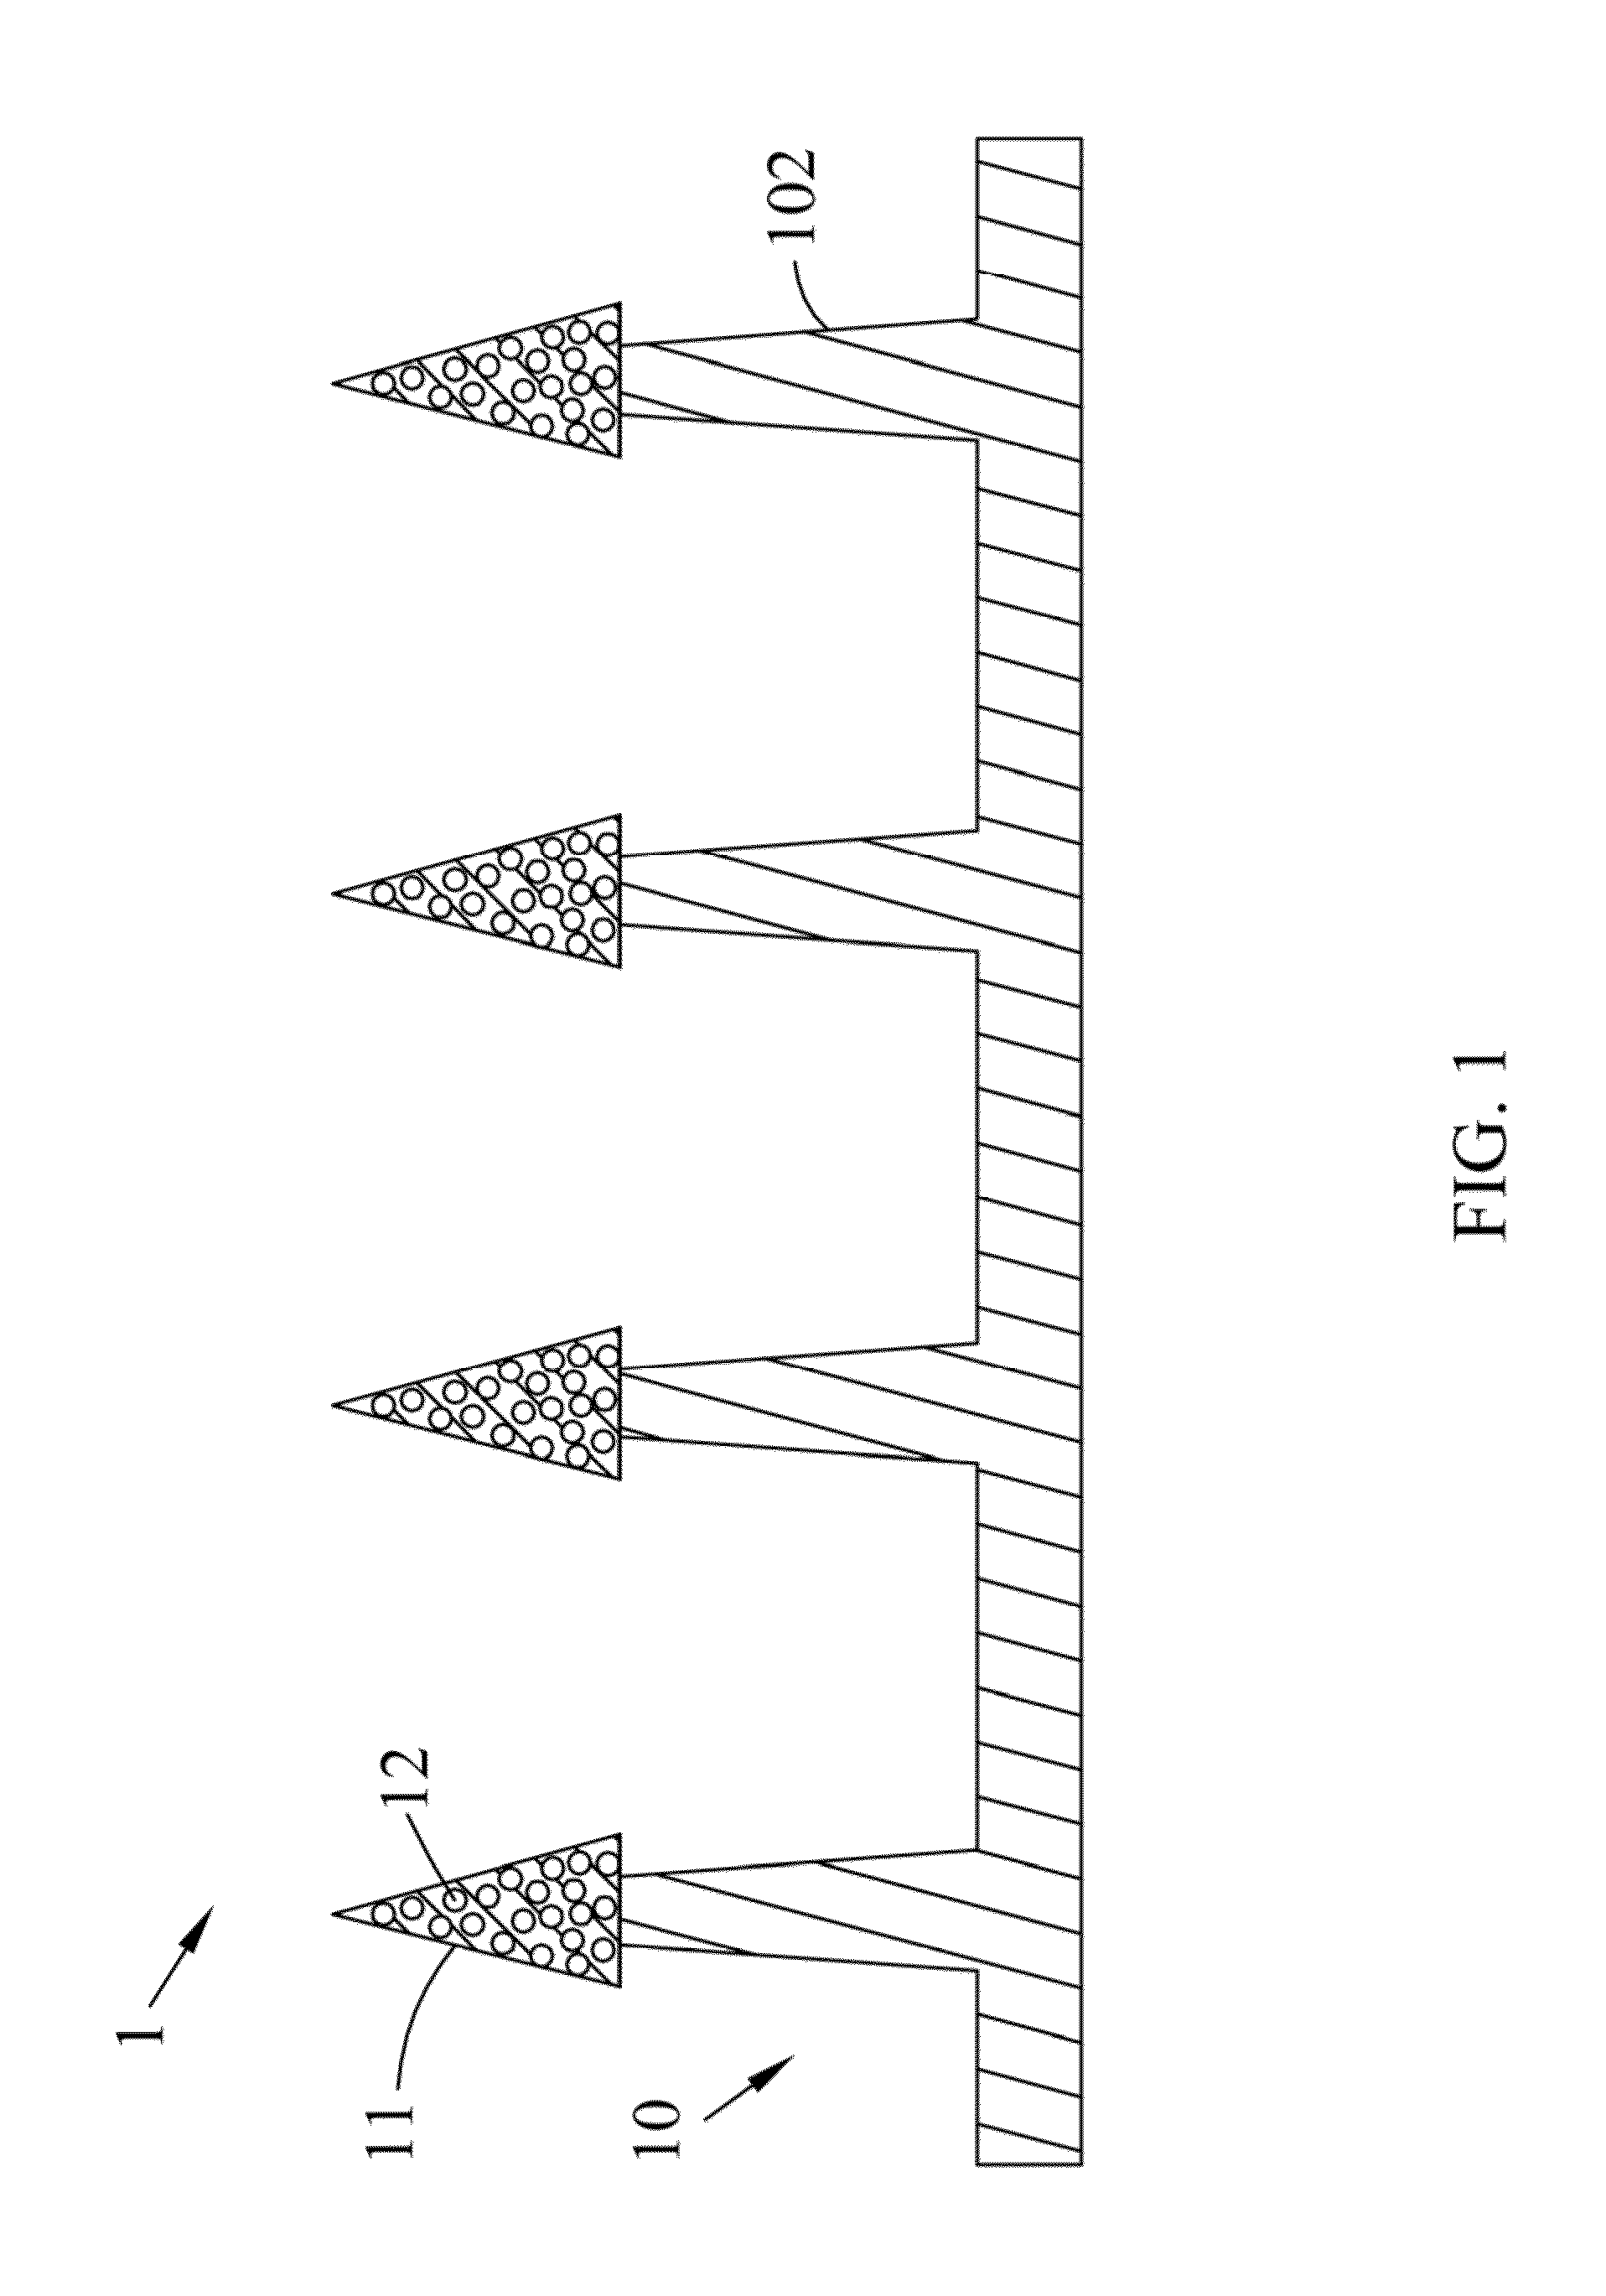 Embeddable micro-needle patch for transdermal drug delivery and method of manufacturing the same